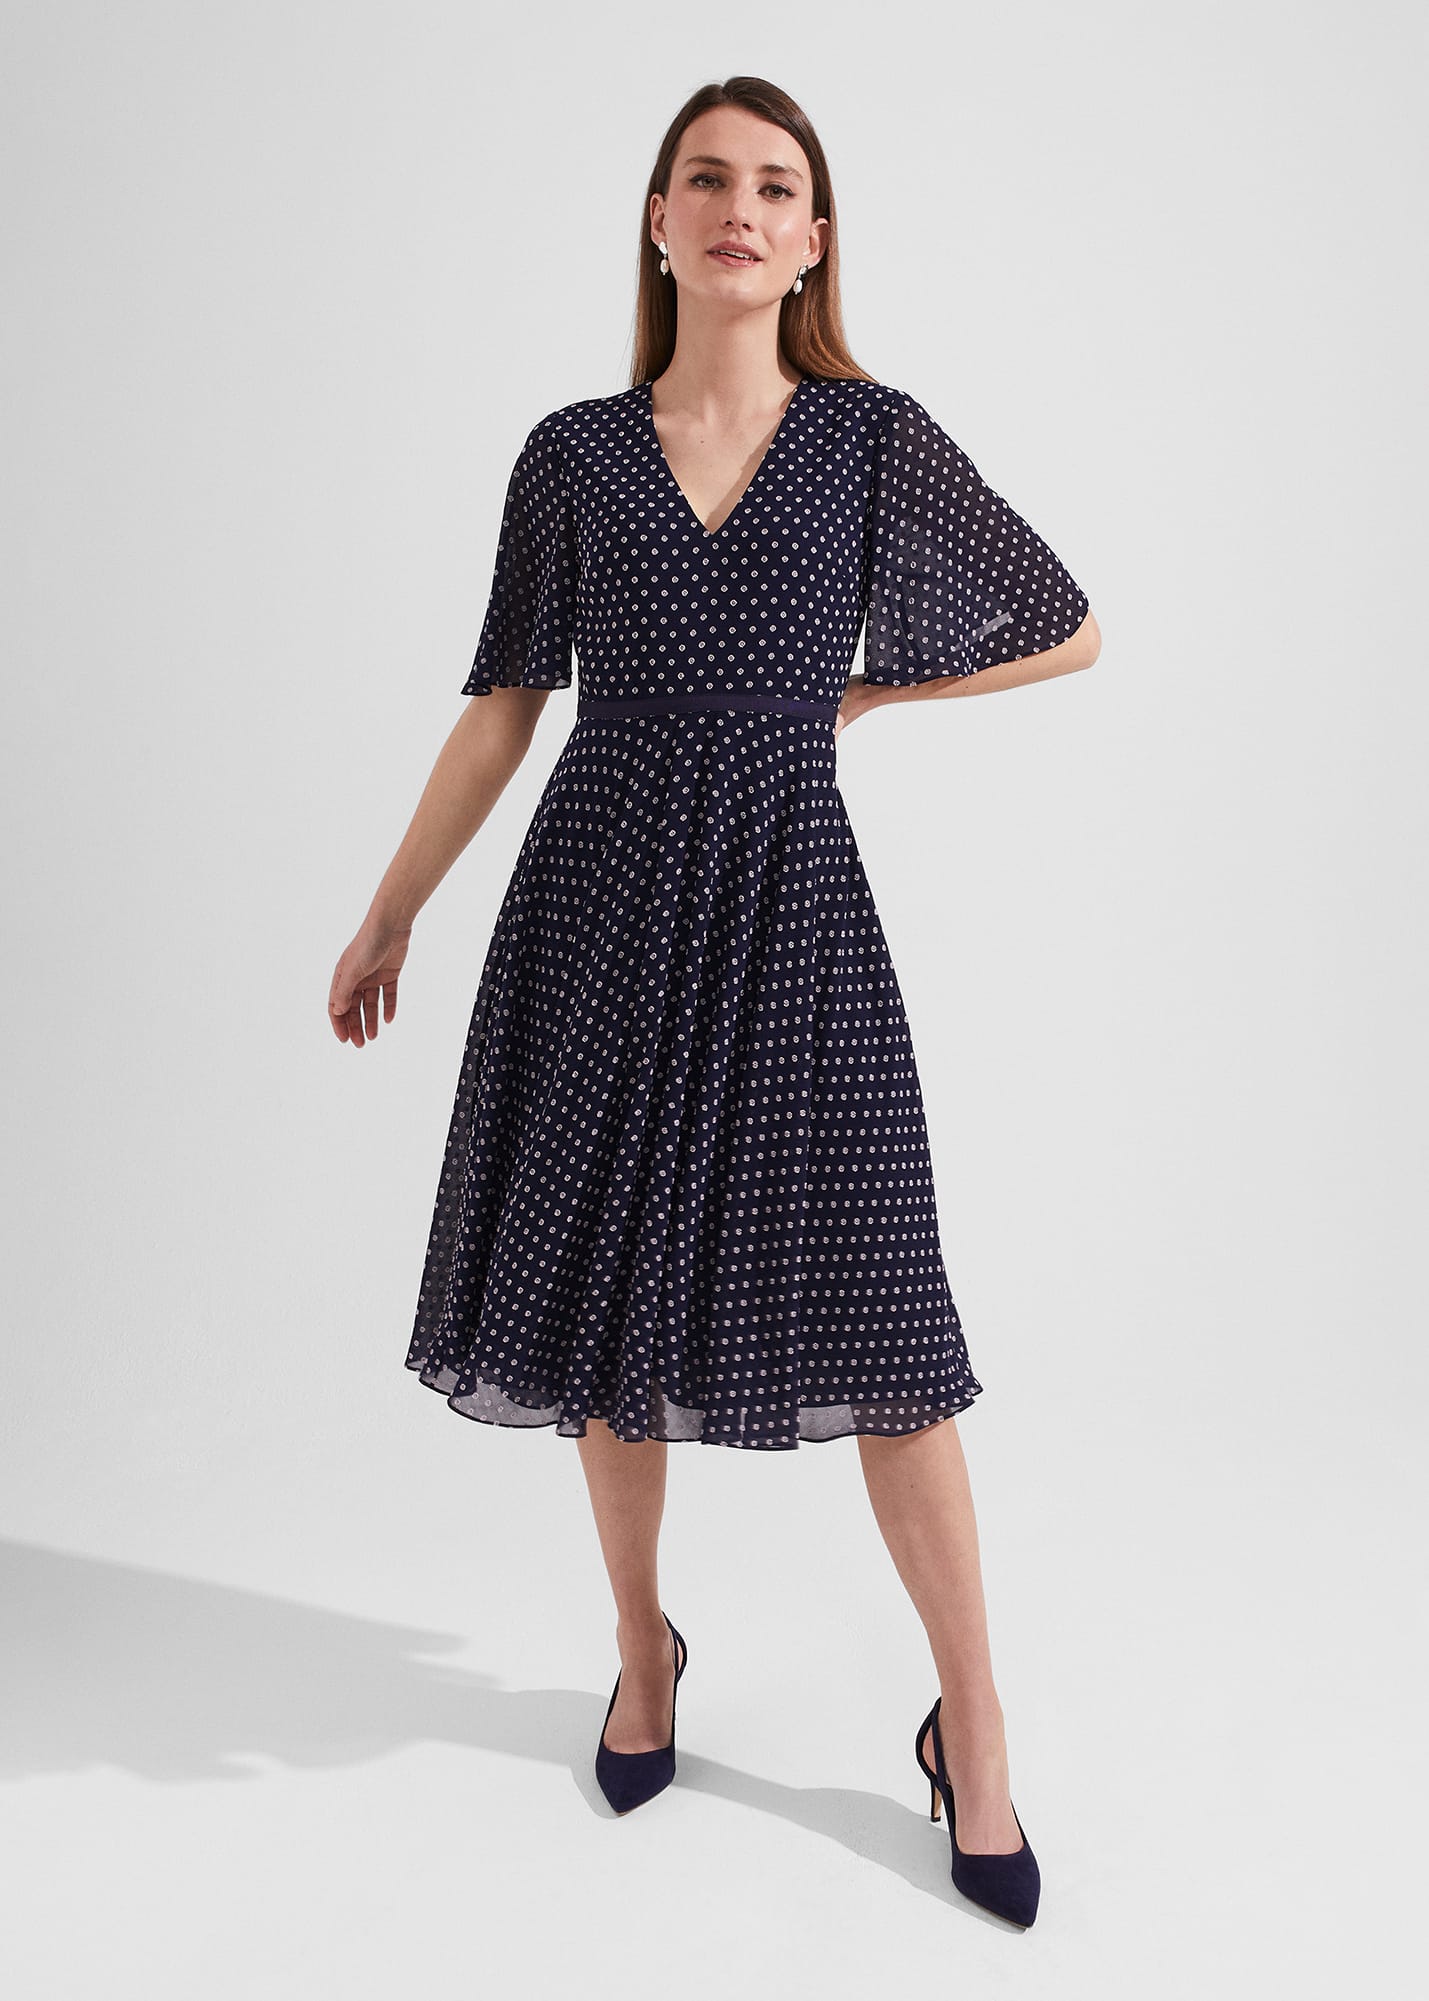 Hobbs Women's Petite Celia Spot Fit And Flare Dress - Navy Pale Pink